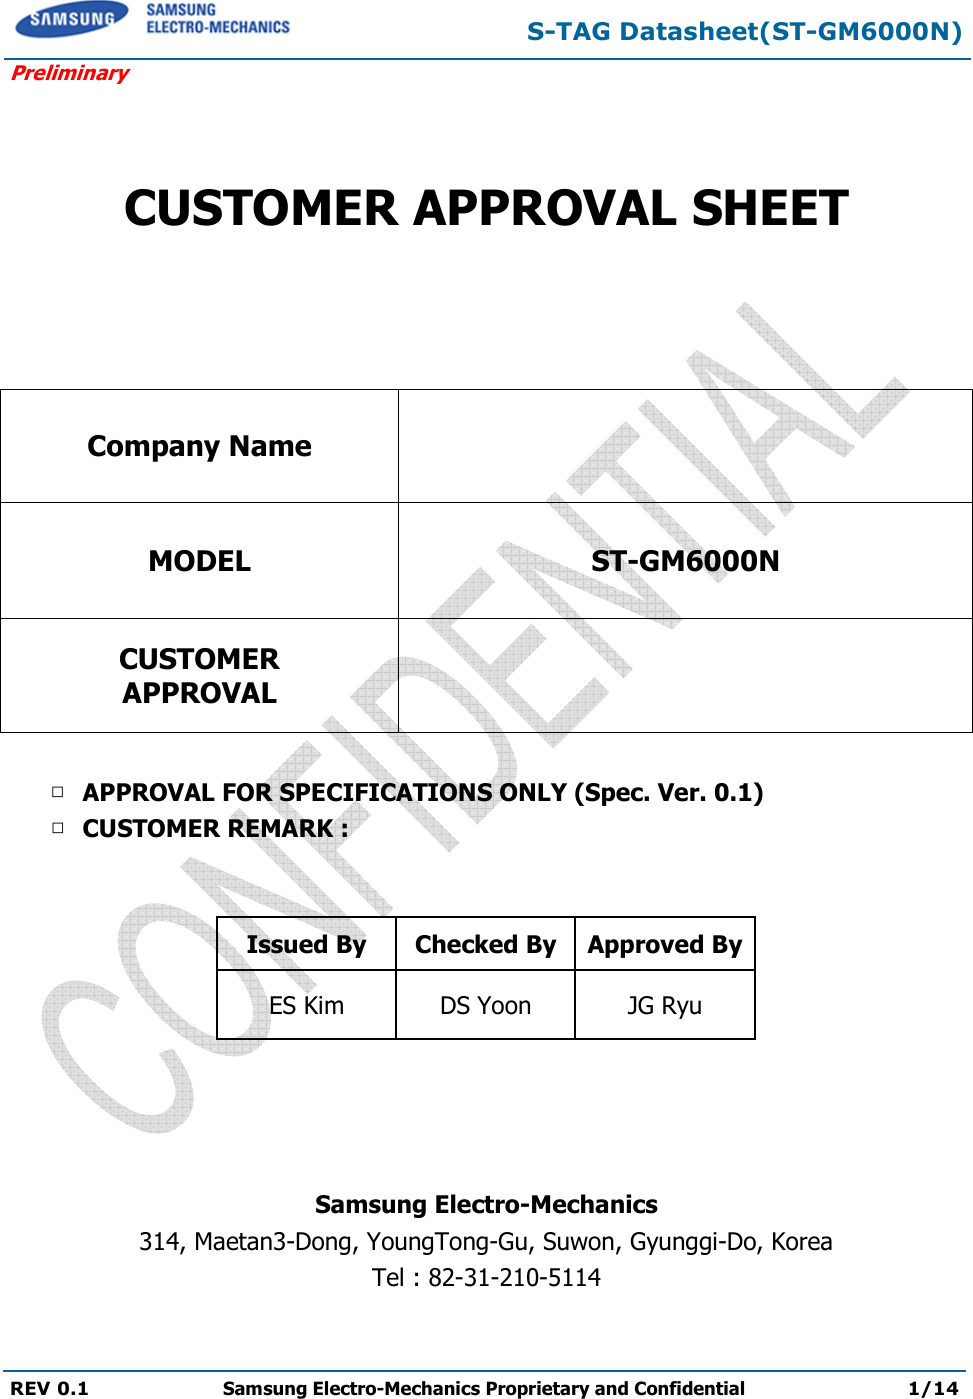  S-TAG Datasheet(ST-GM6000N) Preliminary REV 0.1  Samsung Electro-Mechanics Proprietary and Confidential 1/14     CUSTOMER APPROVAL SHEET   Company Name  MODEL ST-GM6000N CUSTOMER APPROVAL   □ APPROVAL FOR SPECIFICATIONS ONLY (Spec. Ver. 0.1) □ CUSTOMER REMARK :    Issued By  Checked By Approved By ES Kim  DS Yoon  JG Ryu     Samsung Electro-Mechanics 314, Maetan3-Dong, YoungTong-Gu, Suwon, Gyunggi-Do, Korea Tel : 82-31-210-5114